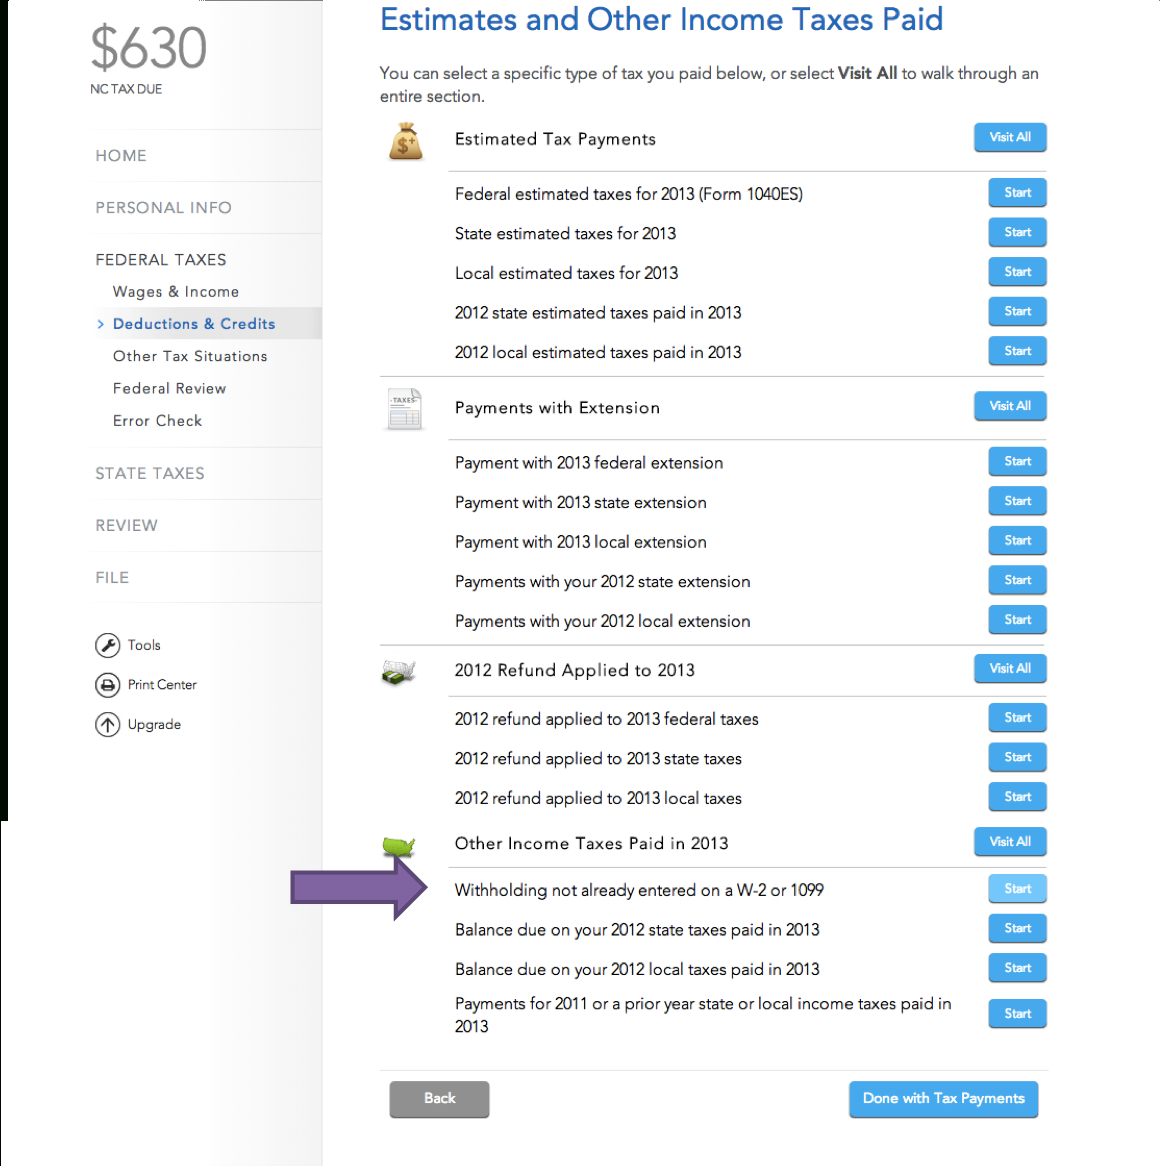 021 Form Templates Misc Other Income Taxes Rare 1099 2014 2015 - Free Printable 1099 Misc Form 2013